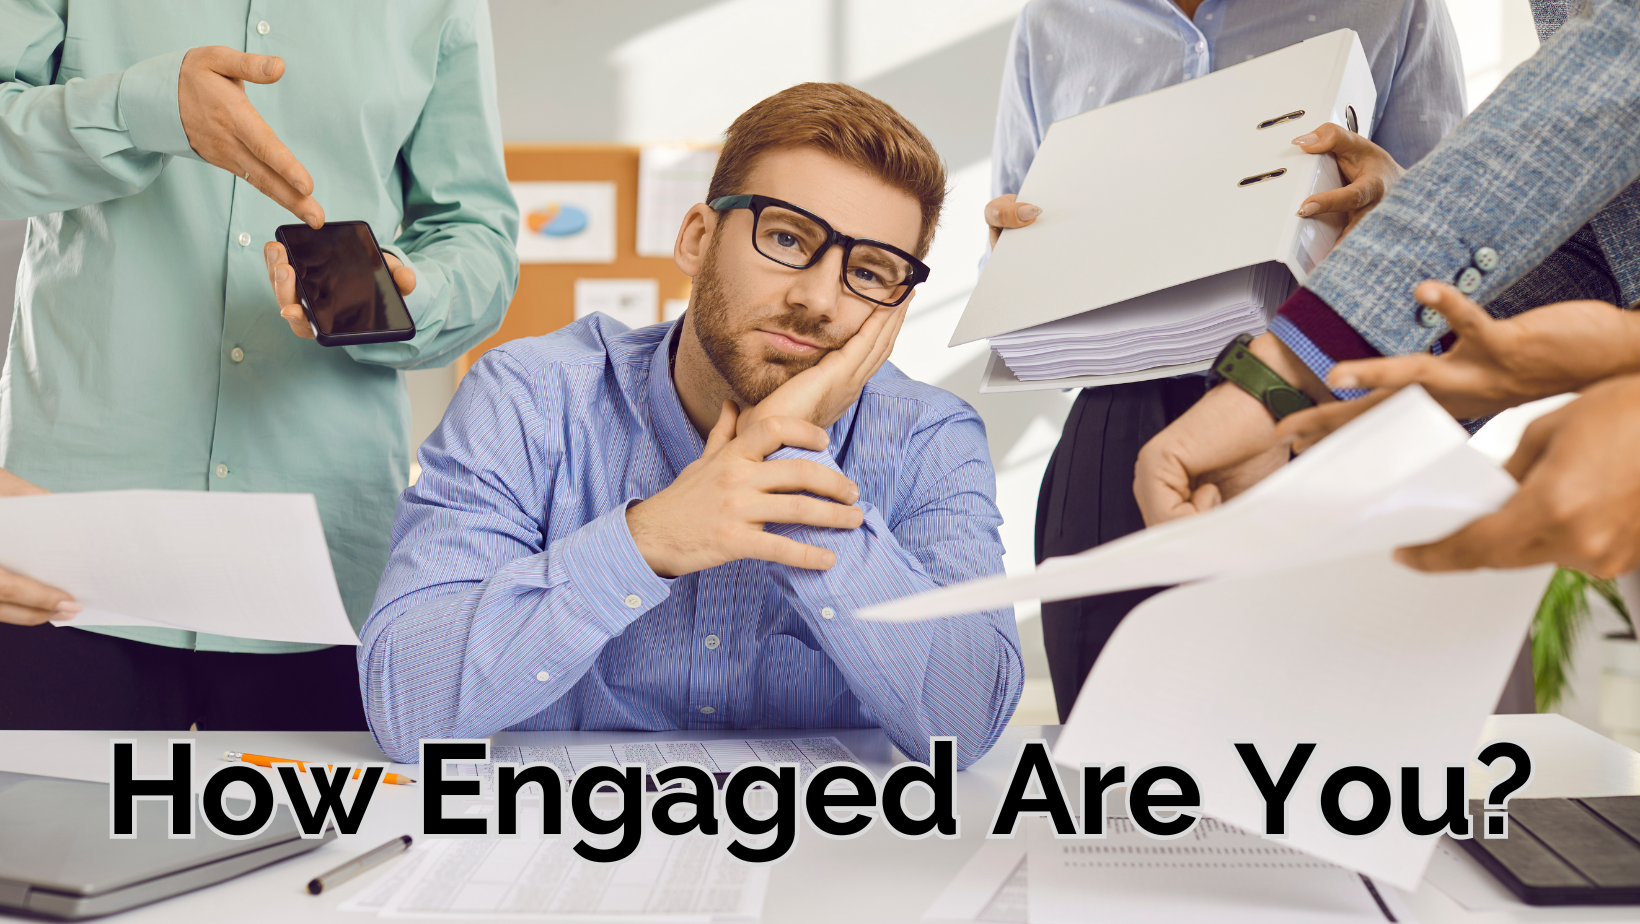 How Engaged Are You?